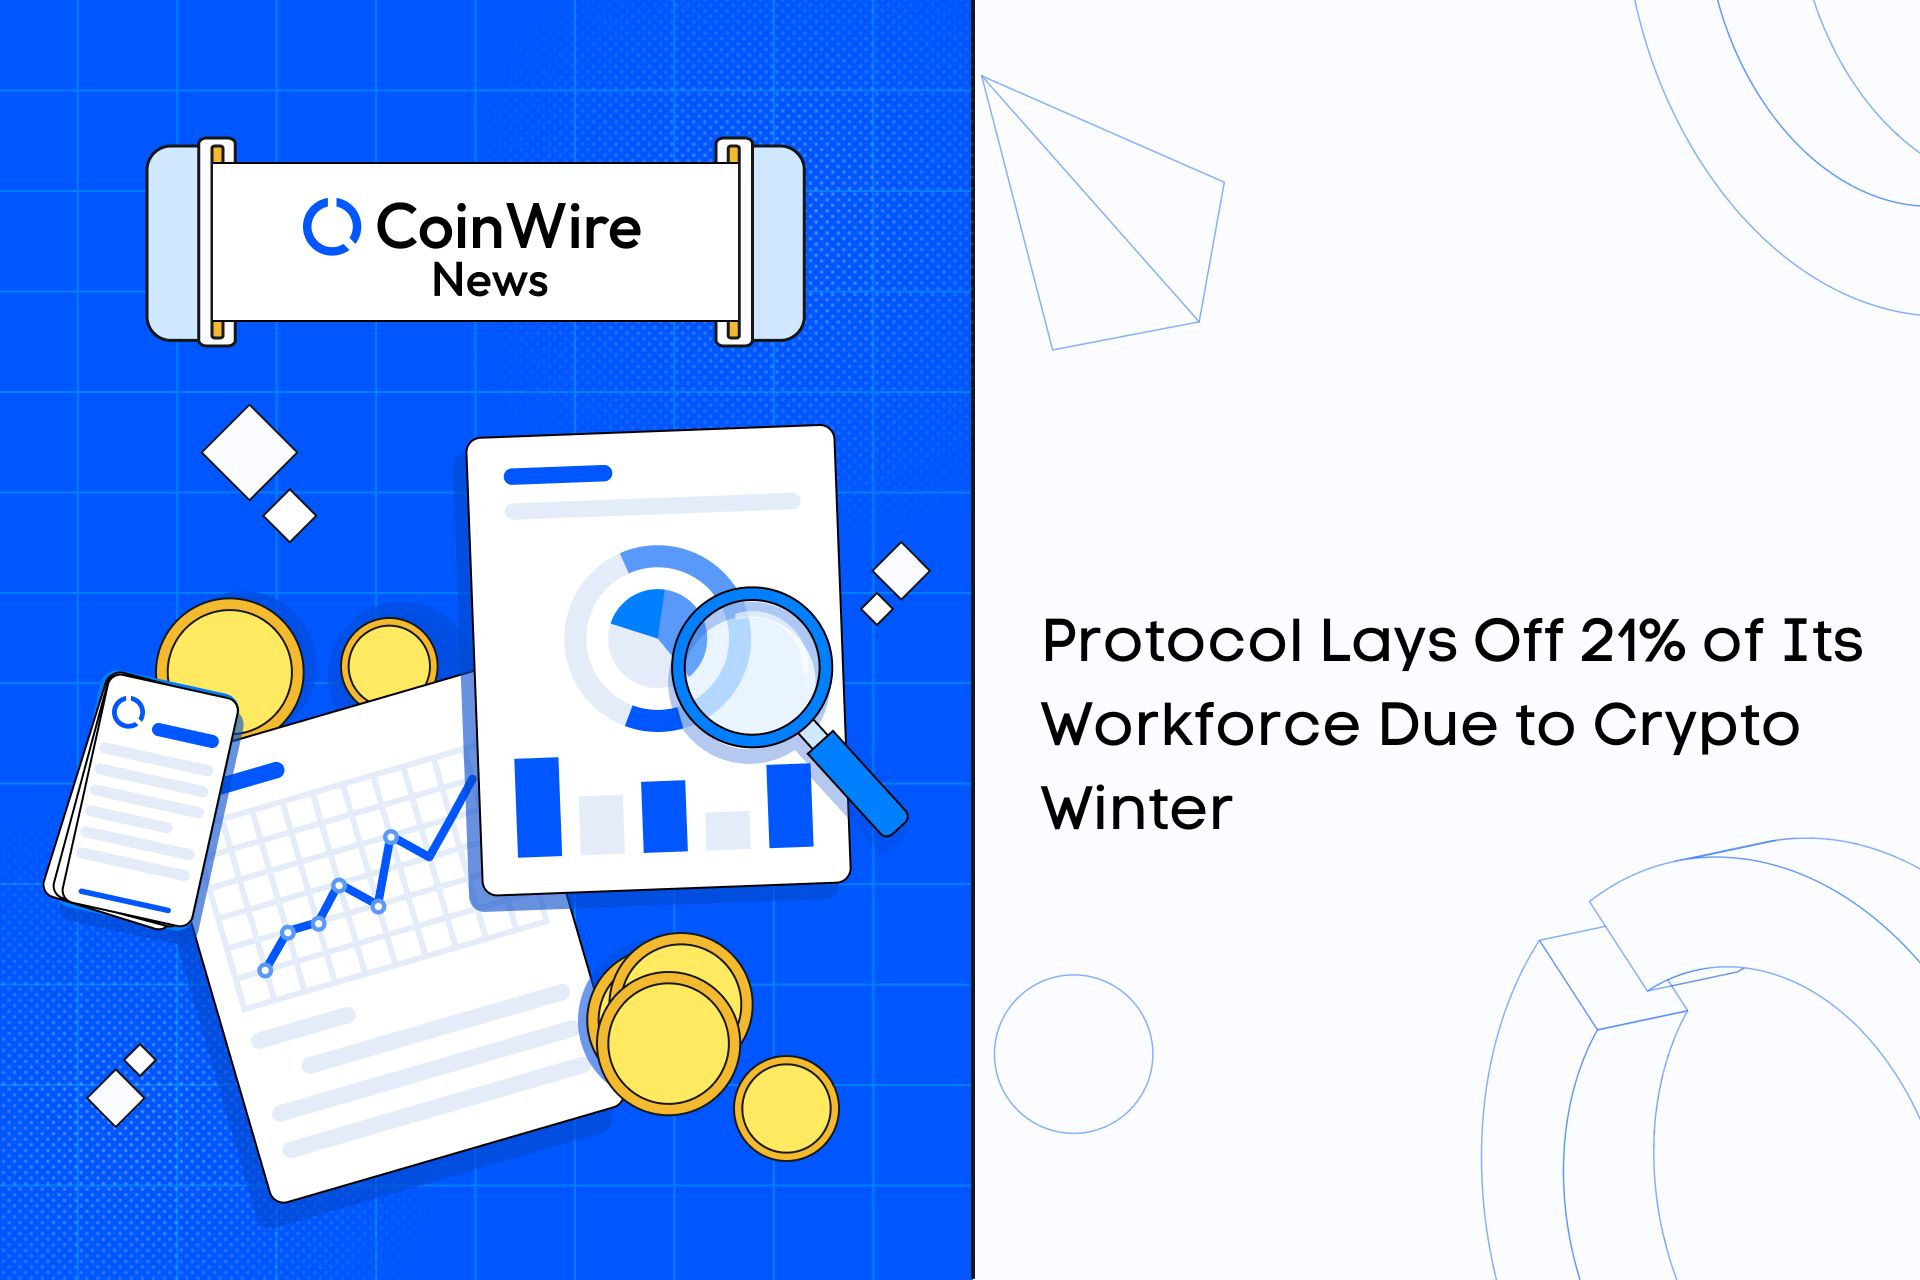 Protocol Lays Off 21% Of Its Workforce Due To Crypto Winter